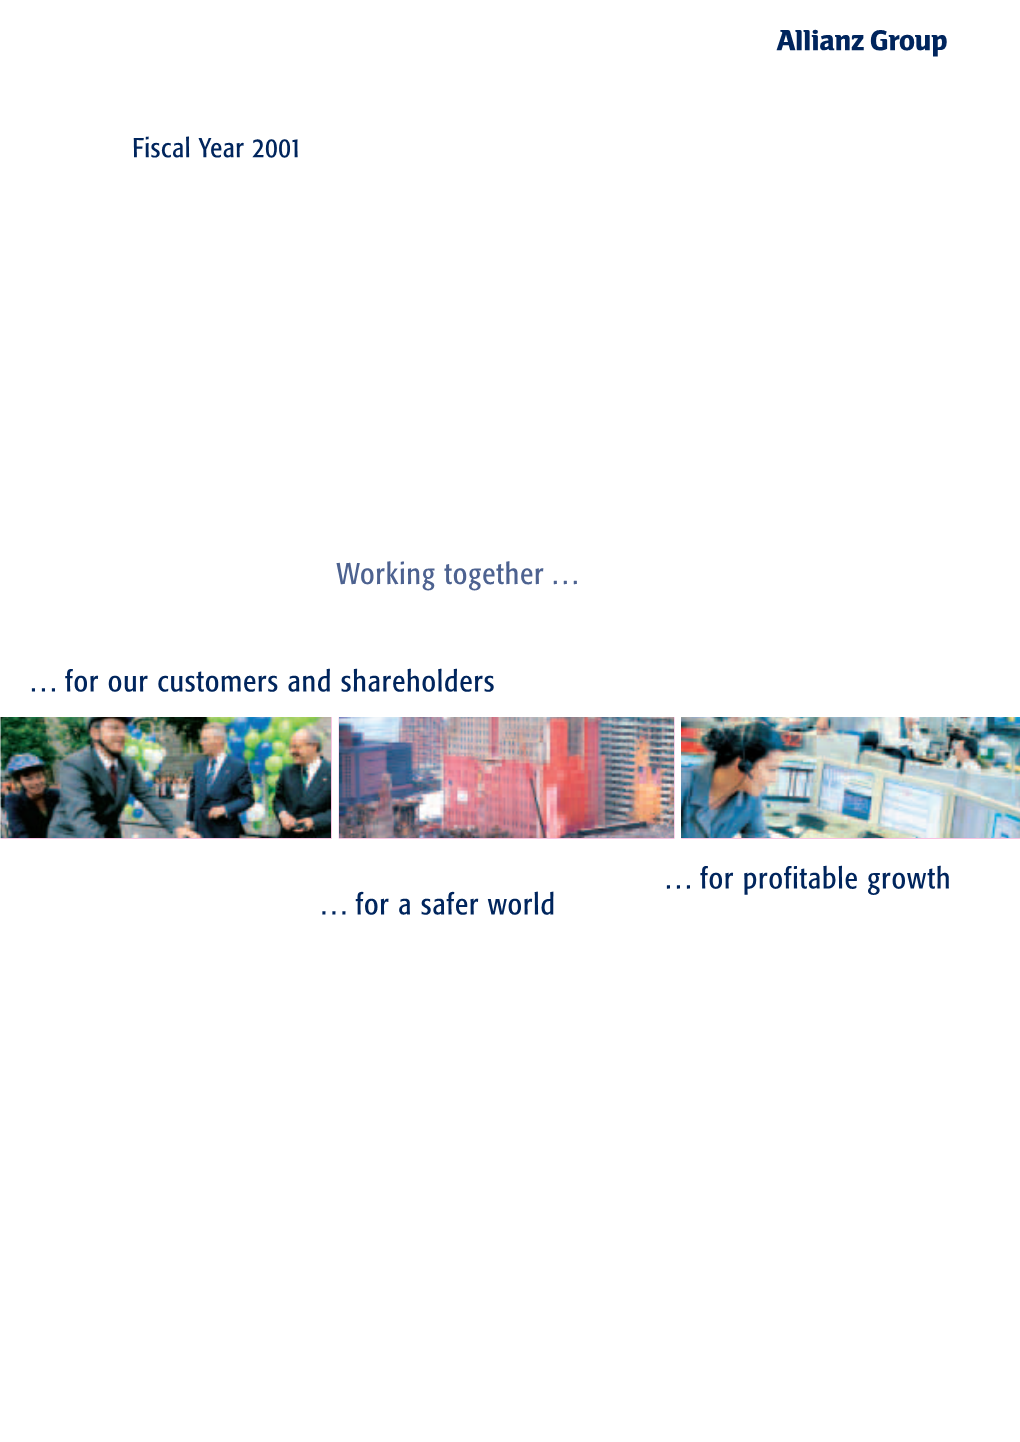 … for Our Customers and Shareholders Working Together … … for a Safer World … for Profitable Growth